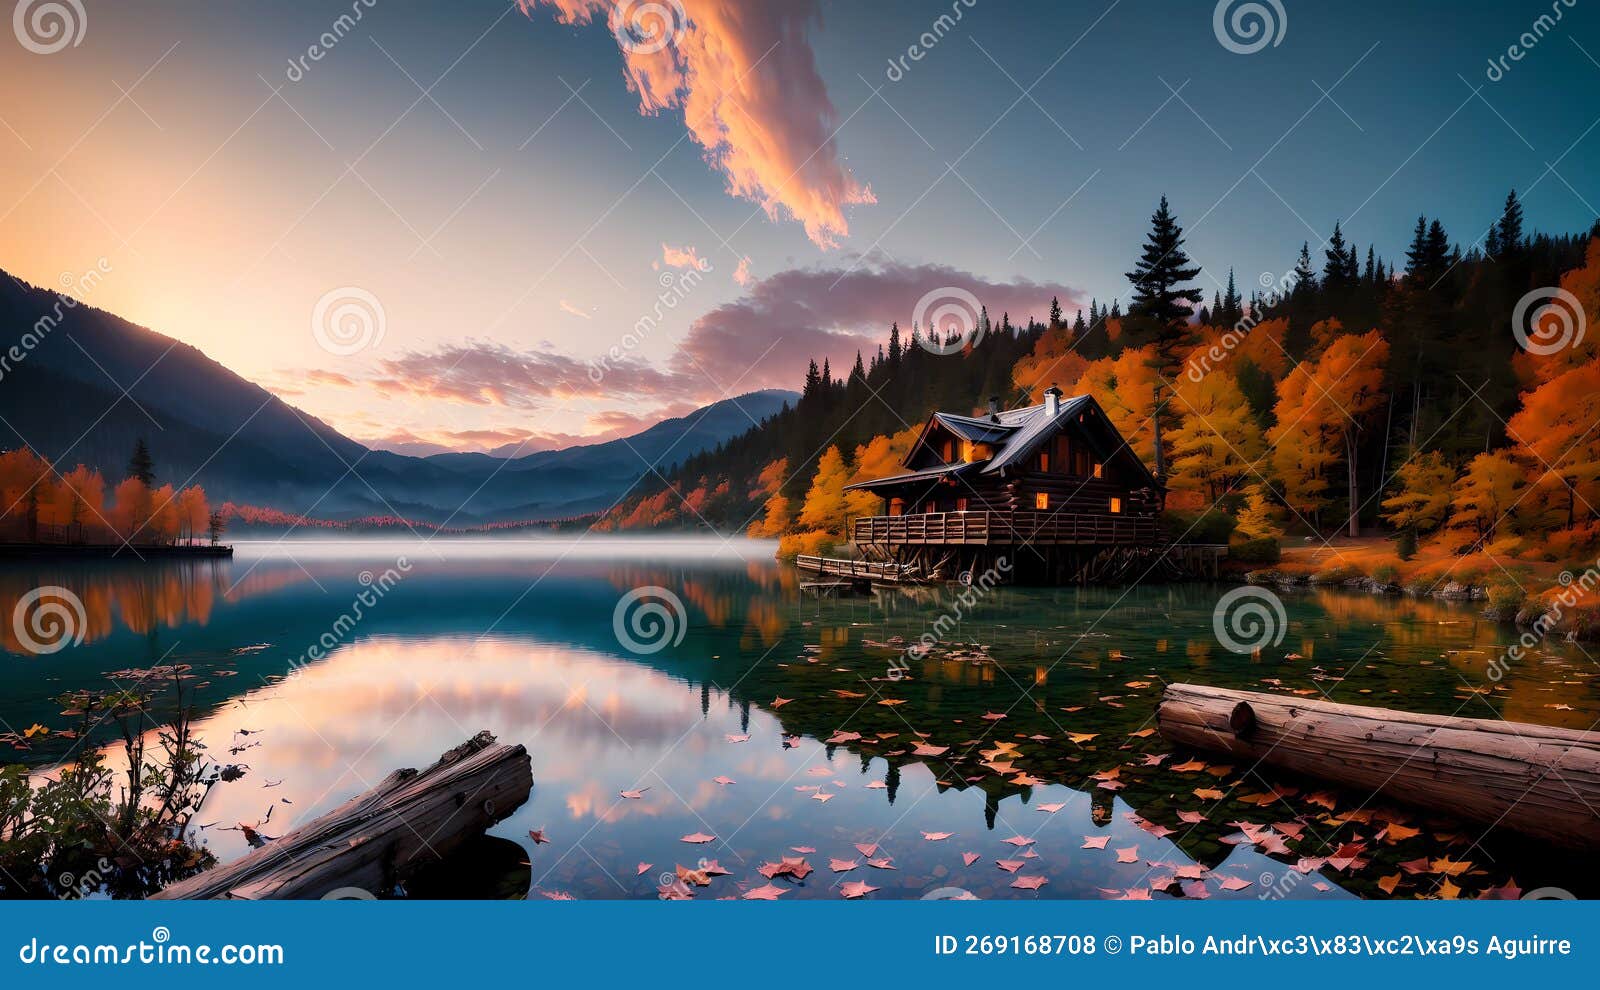 lake cottage wallpapers